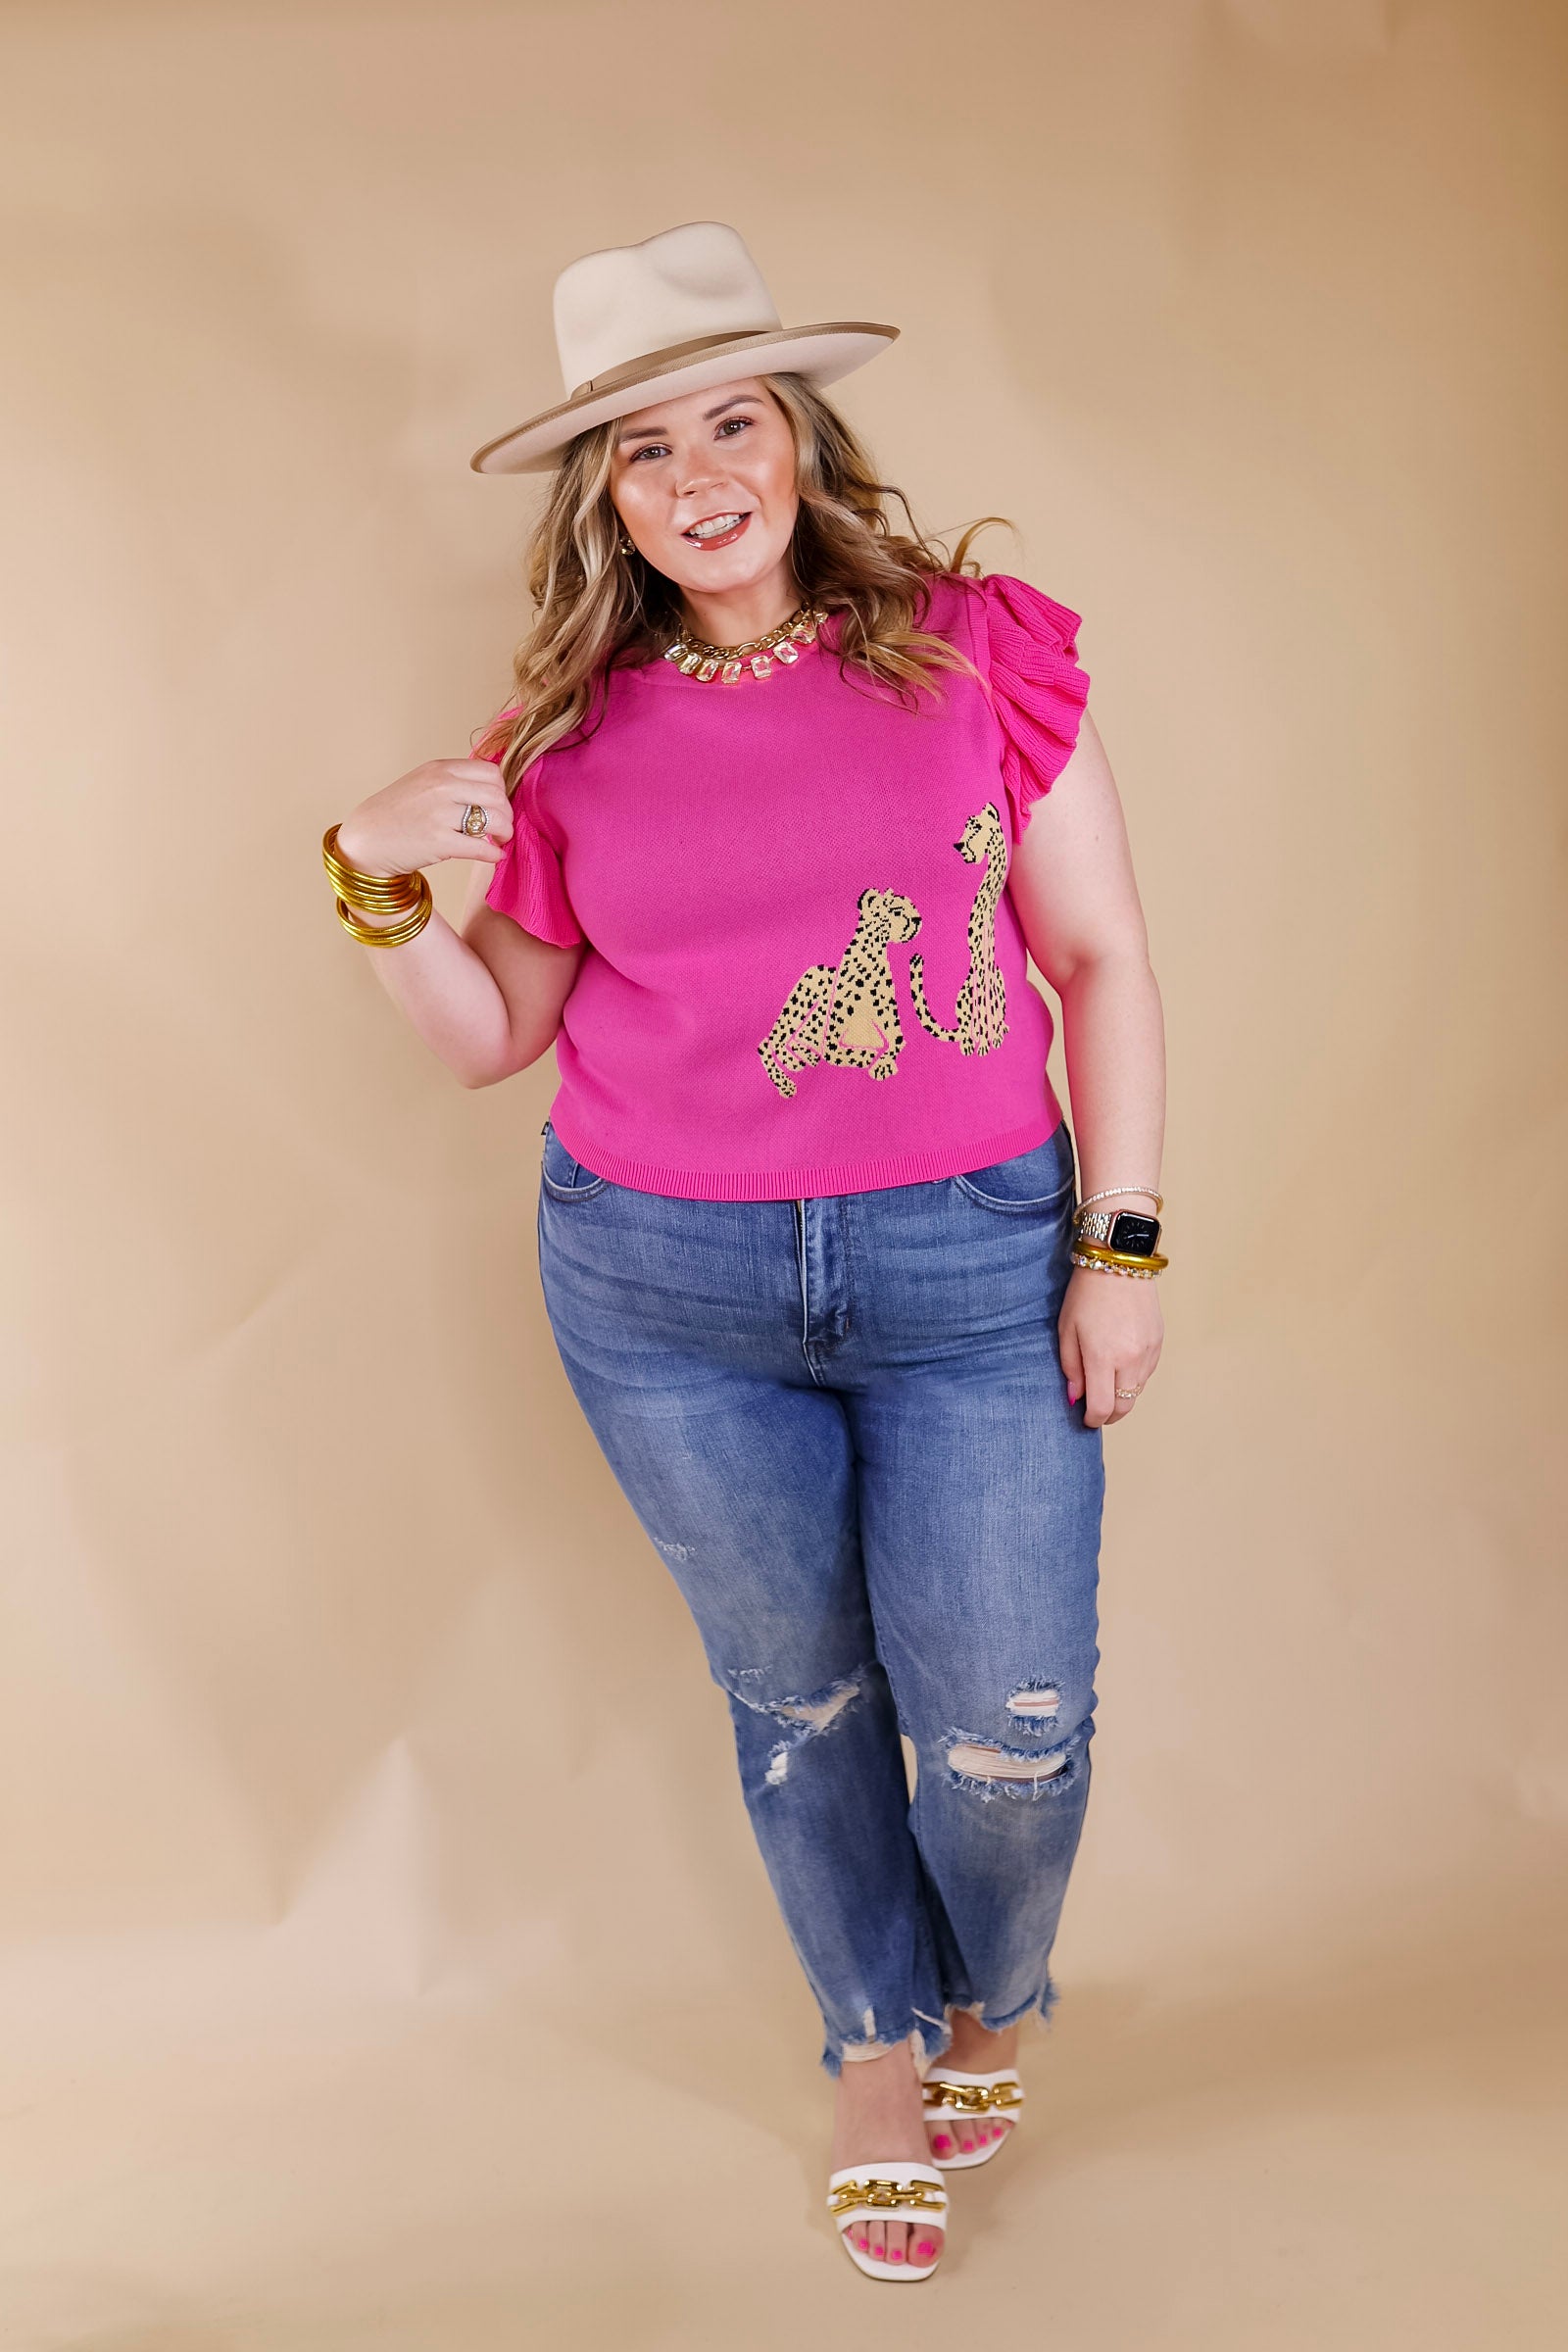 Talk This Way Cheetah Print Sweater with Ruffle Cap Sleeves in Pink - Giddy Up Glamour Boutique